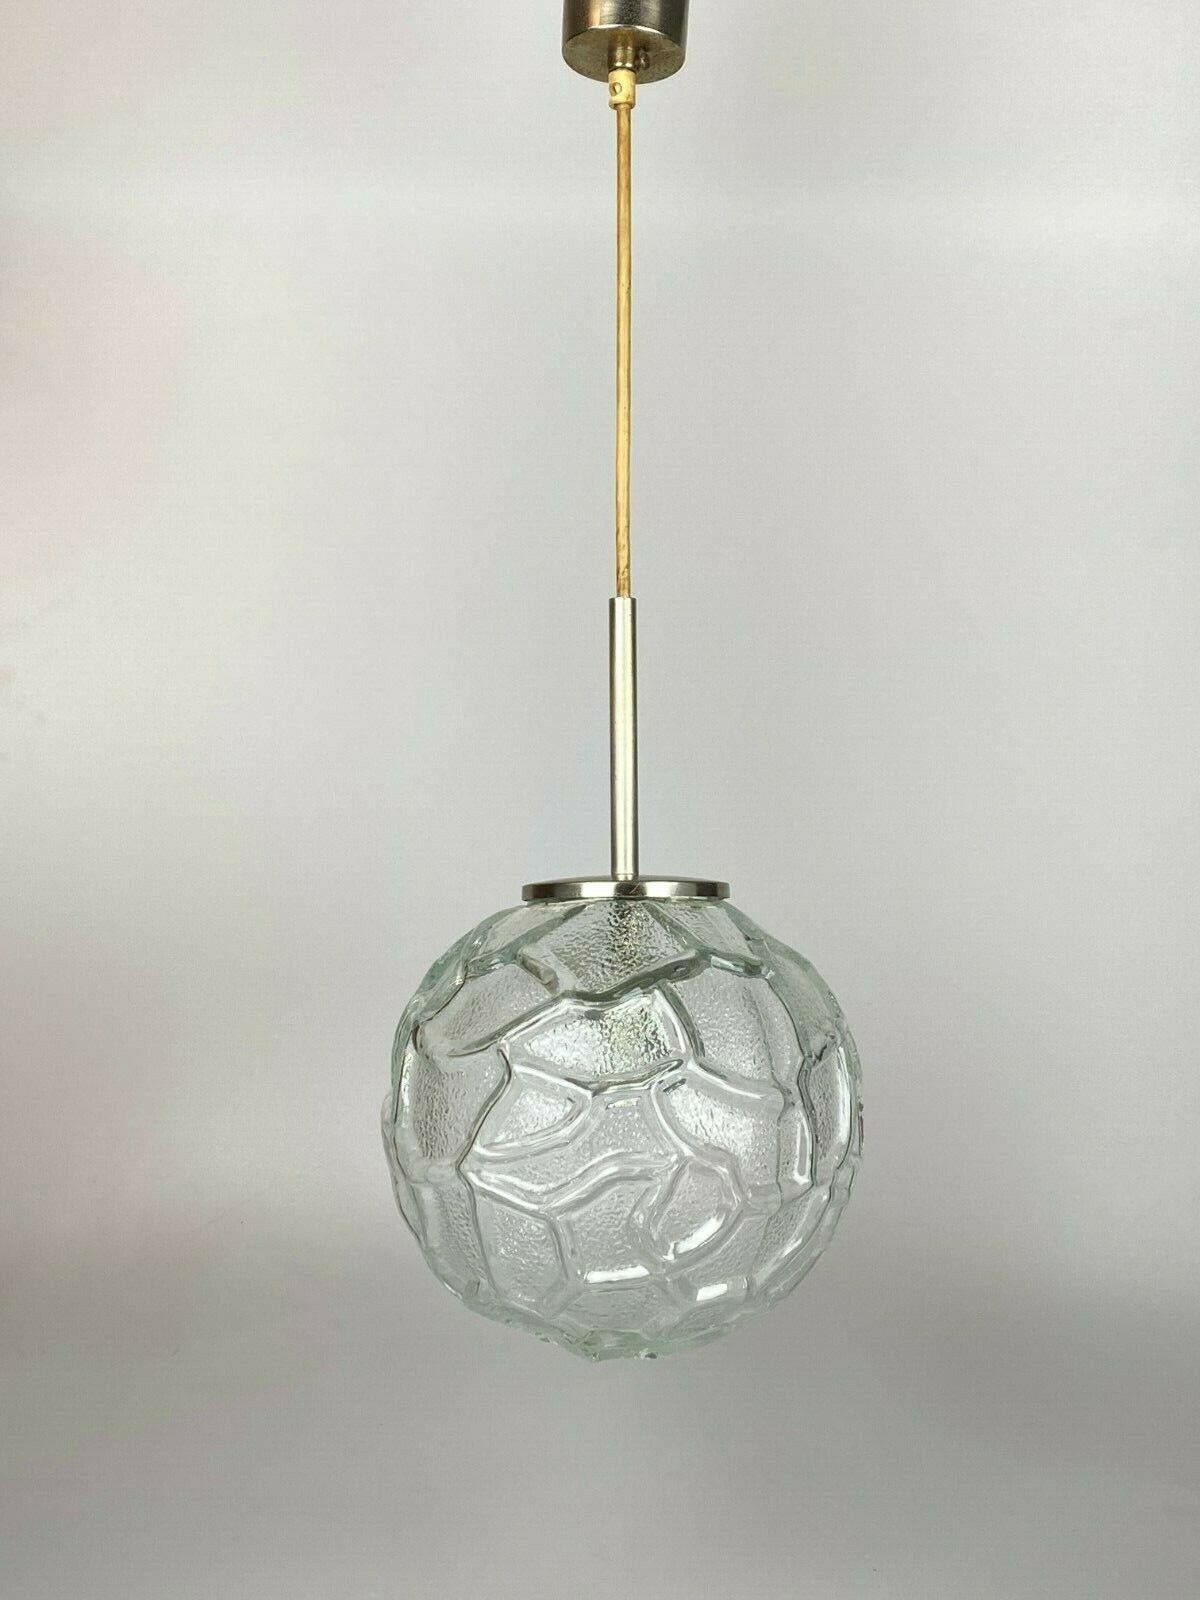 60s 70s lamp light ceiling lamp hanging lamp Hillebrand glass space age design

Object: hanging lamp

Manufacturer: Hillebrand

Condition: good - vintage

Age: around 1960-1970

Dimensions:

Diameter = 22cm
Height = 70cm

Other